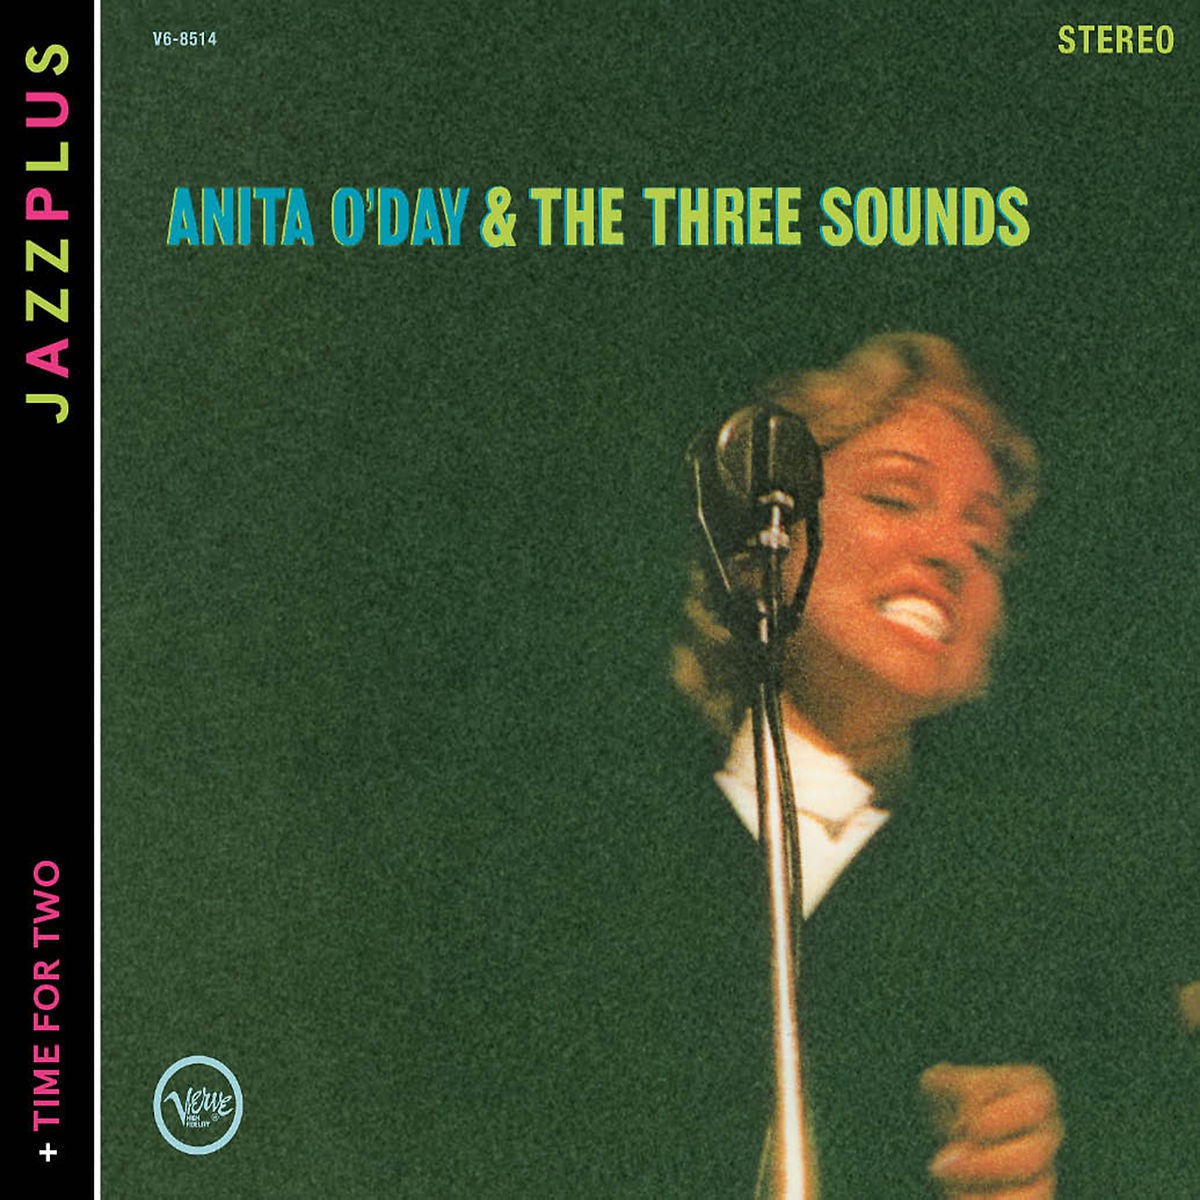 Three sound. Anita o'Day. The three Sounds here we come 1961 фото. Under a Blanket of Blue Anita o'Day, cal Tjader.